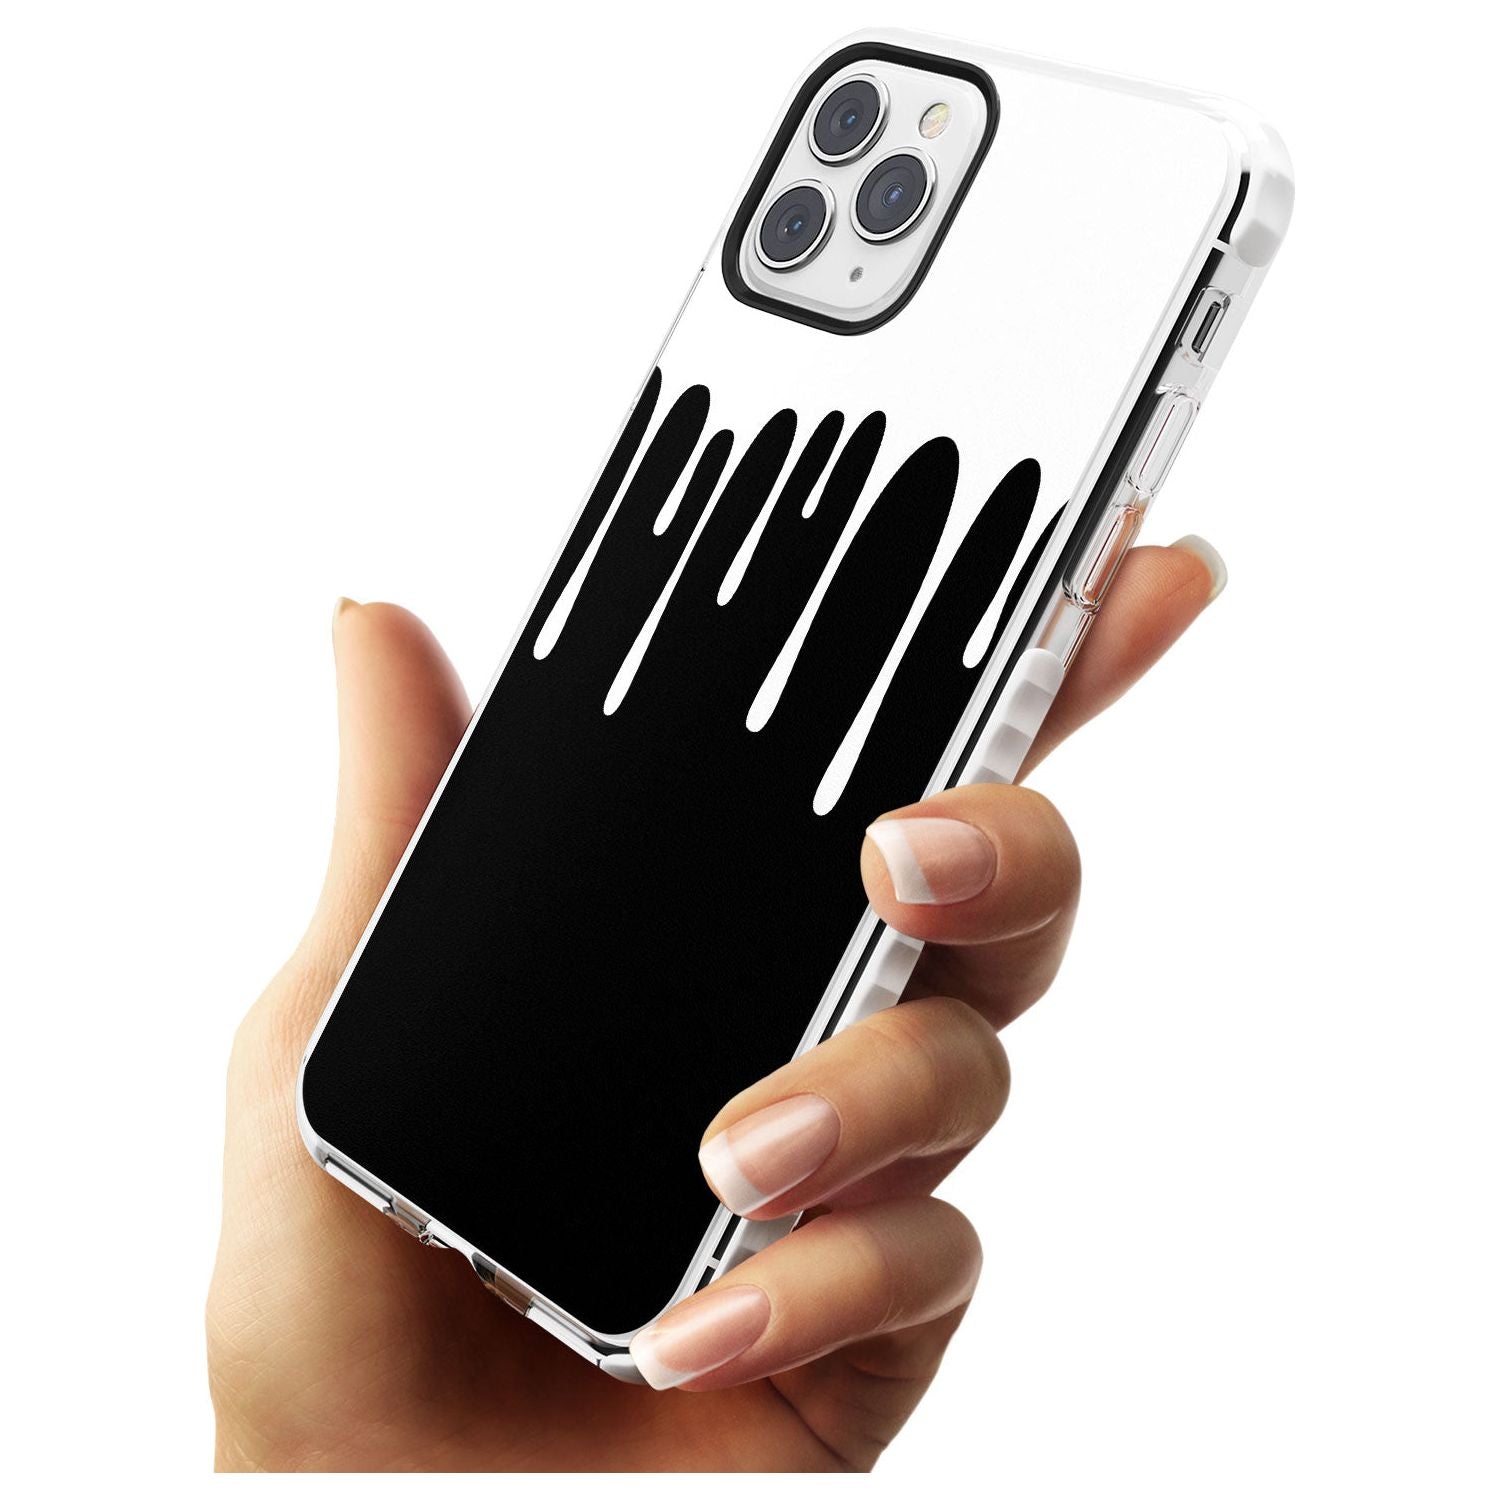 Melted Effect: White & Black iPhone Case Impact Phone Case Warehouse 11 Pro Max